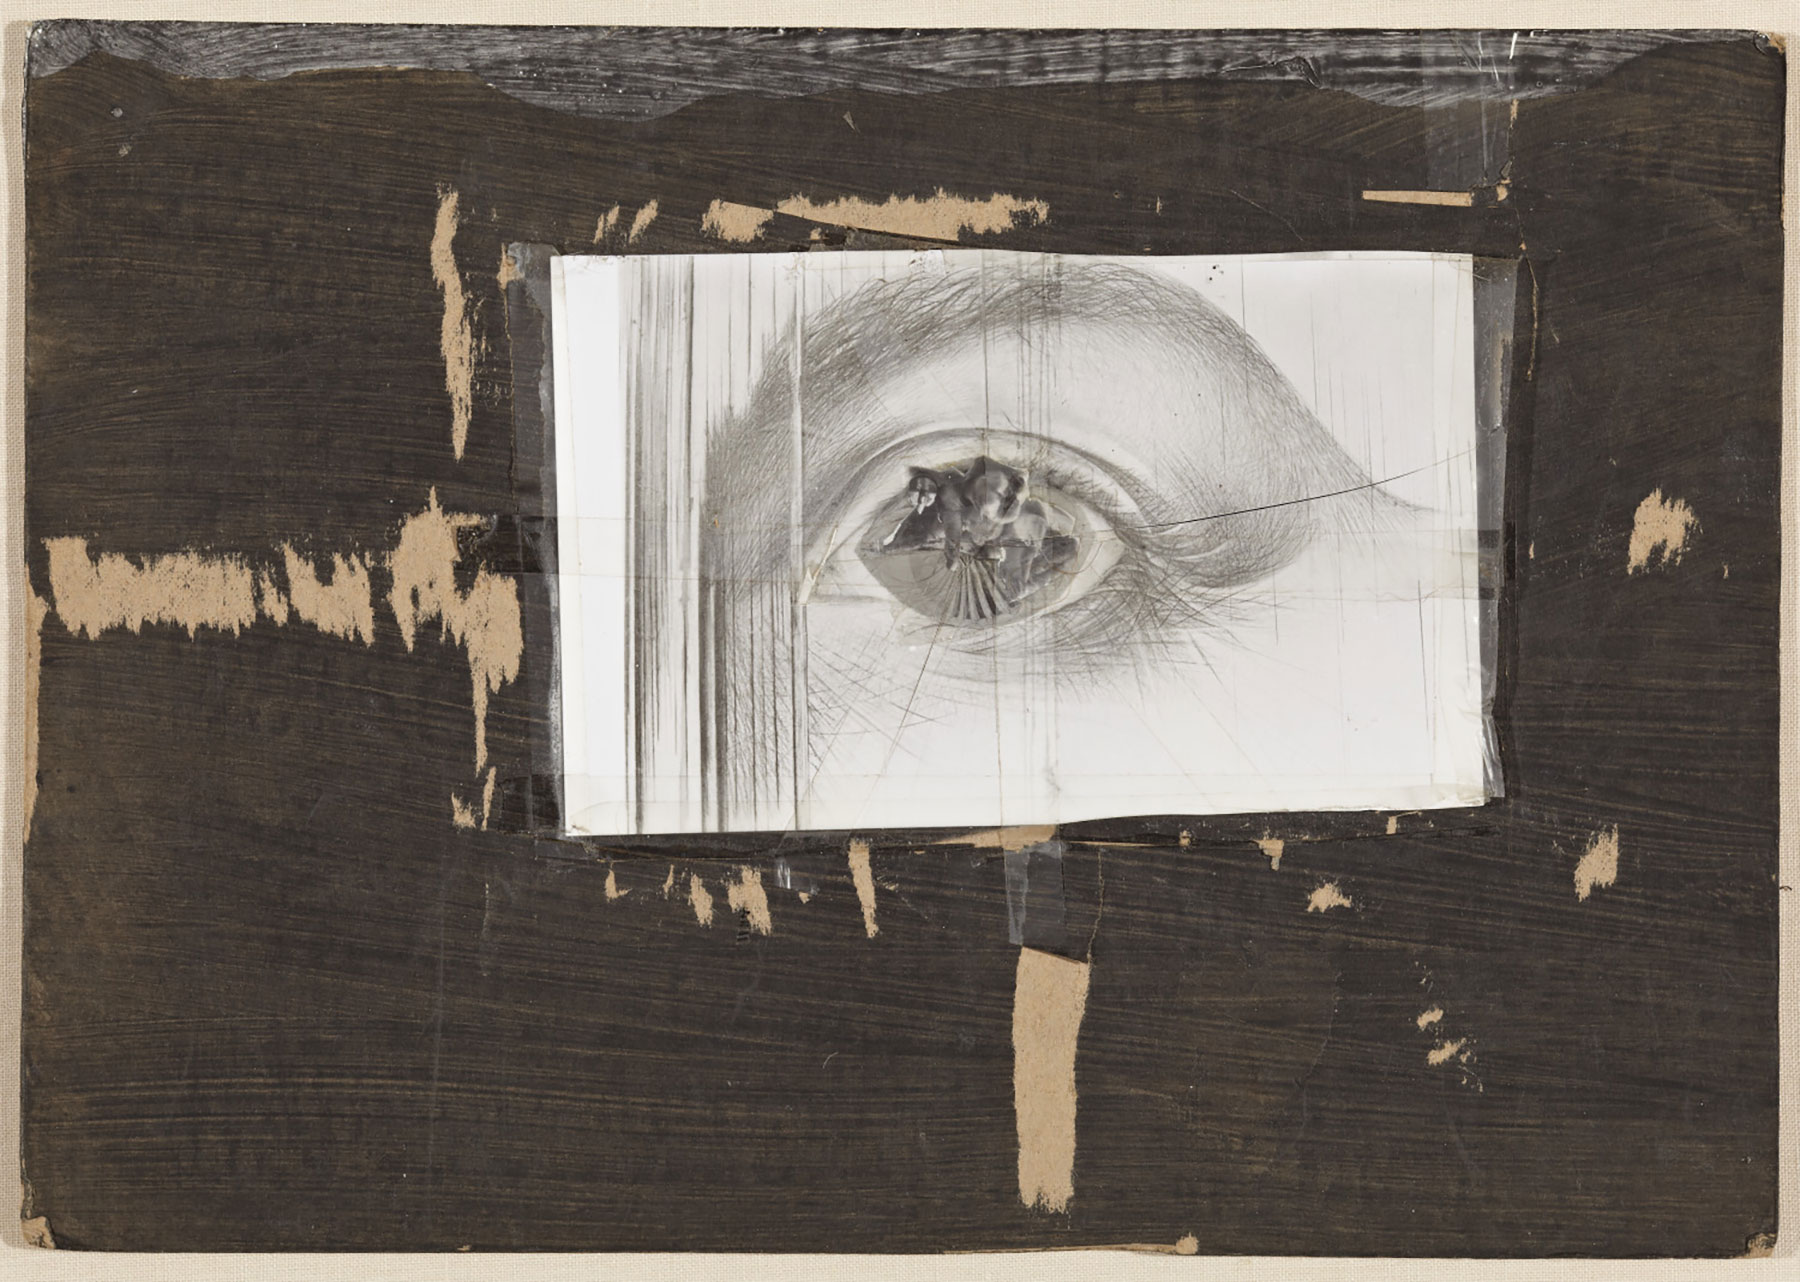 Jay DeFeo, Untitled, c. 1972-1973. Photo collage with tape on painted rag board. Purchased with funds provided by Contemporary Forum. © 2020 Artists Rights Society (ARS), New York.